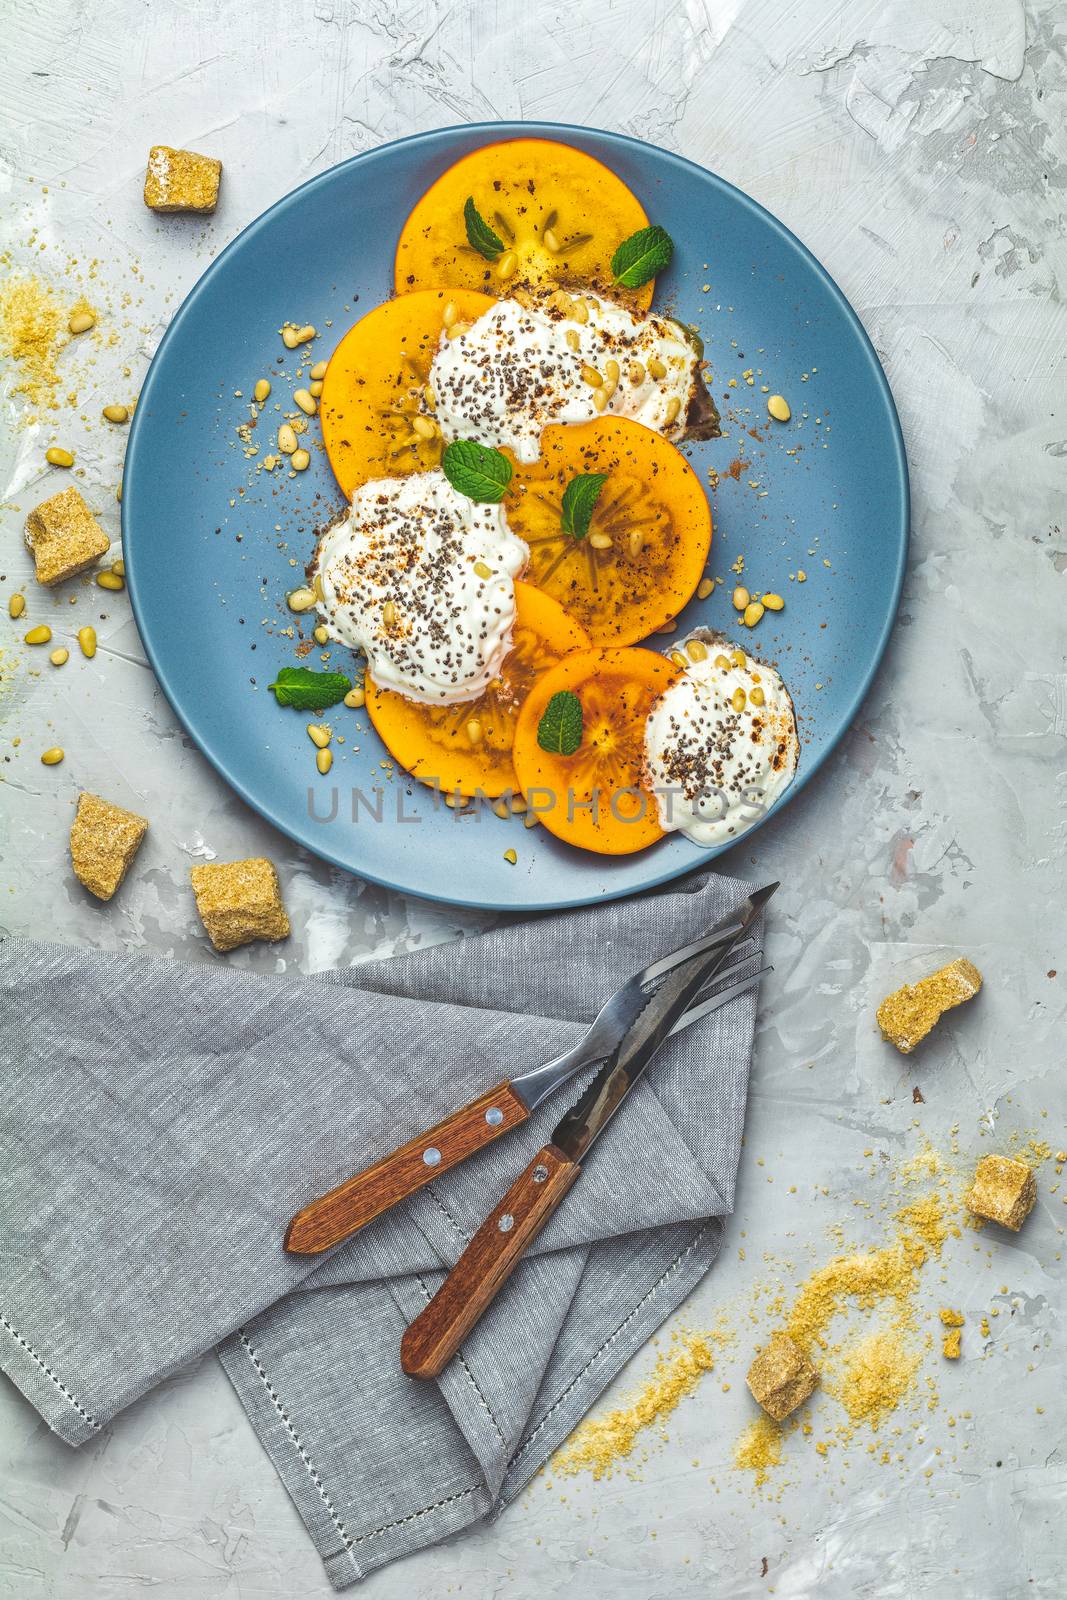 Delicious healthy fruit breakfast. Sliced persimmon with yogurt, chia seeds, brown sugar, pine nuts and fresh mint in blue plate on light gray concrete table surface background, top view, flat lay.